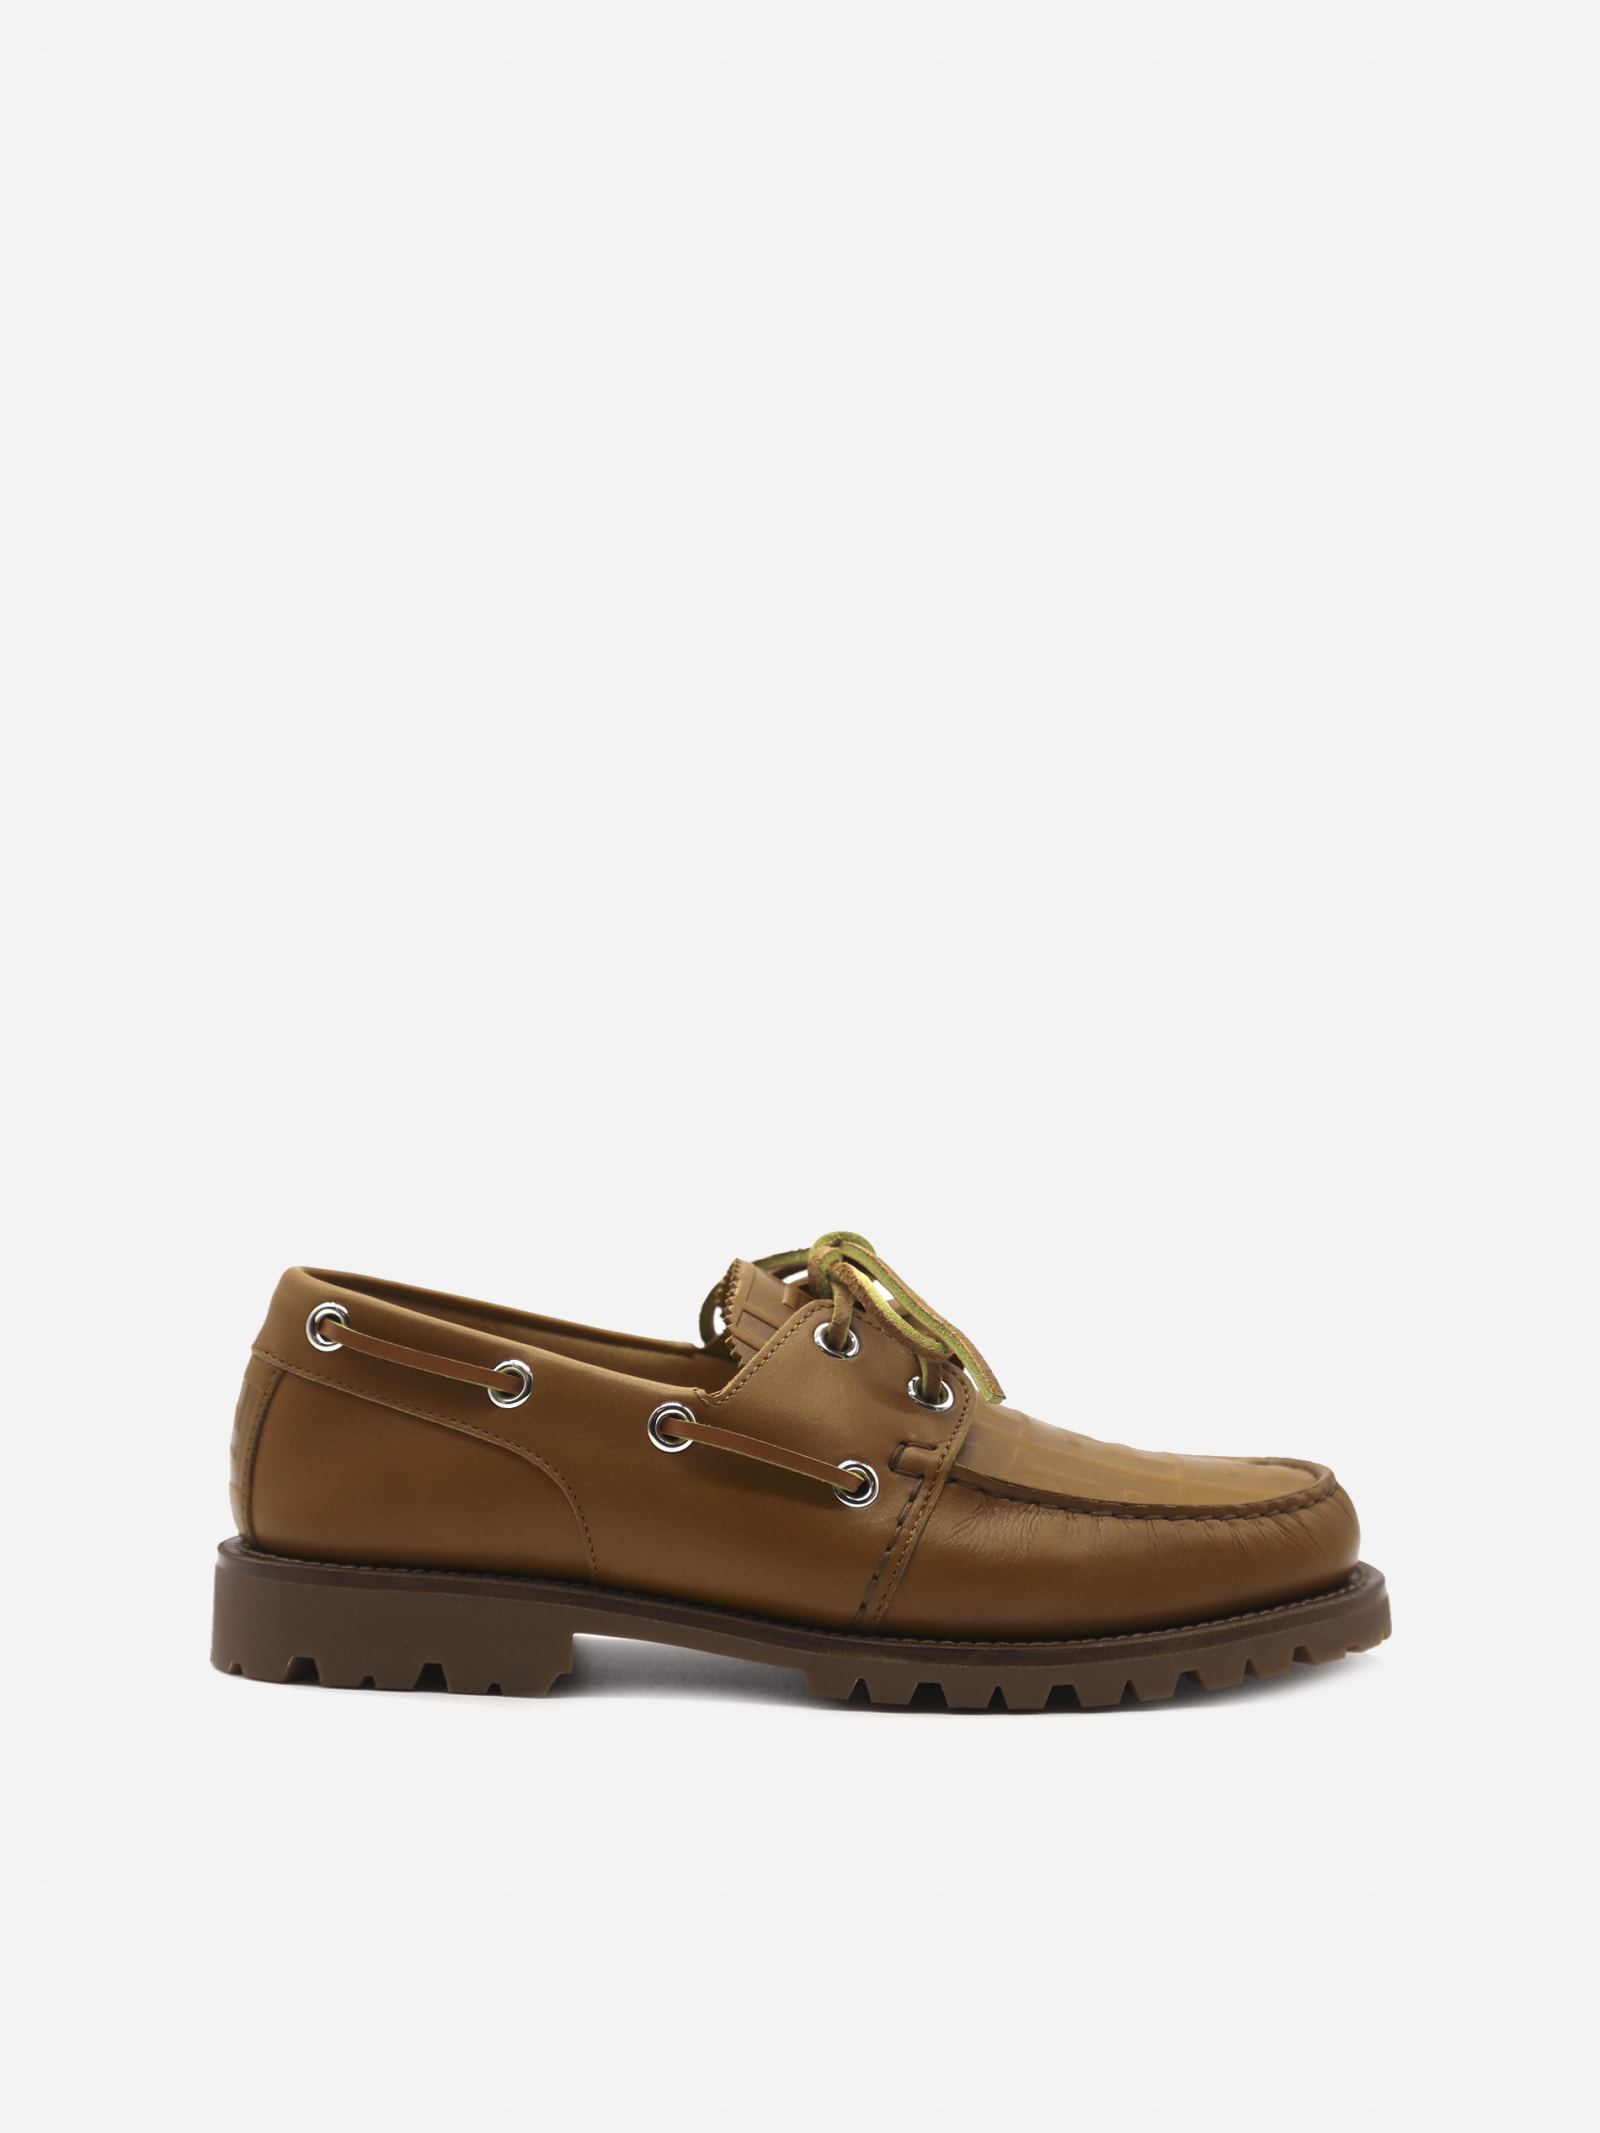 Fendi Leather Loafers With Hot-stamped Ff Motif In Brown